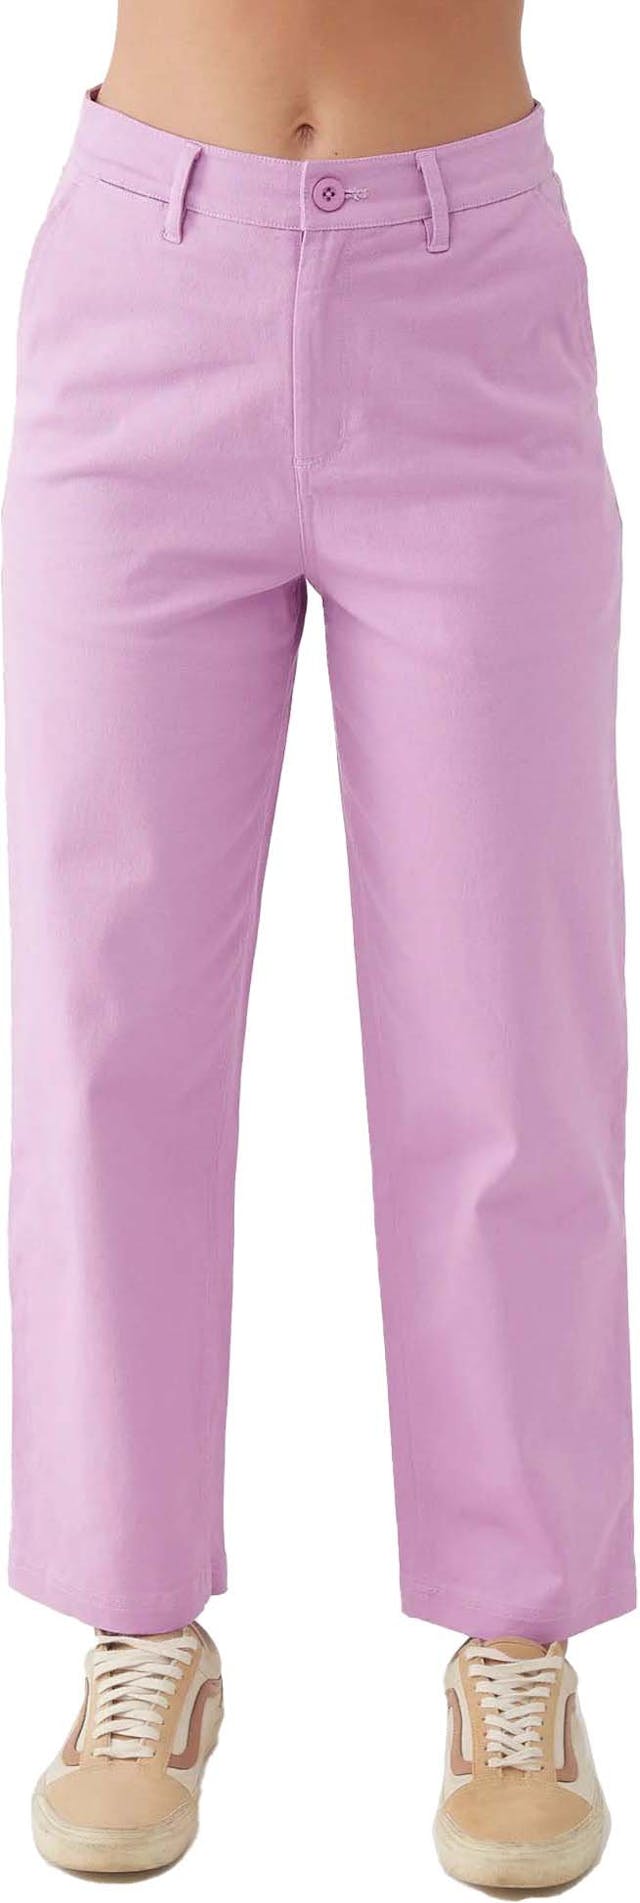 Product image for Heather Woven Pant - Women's